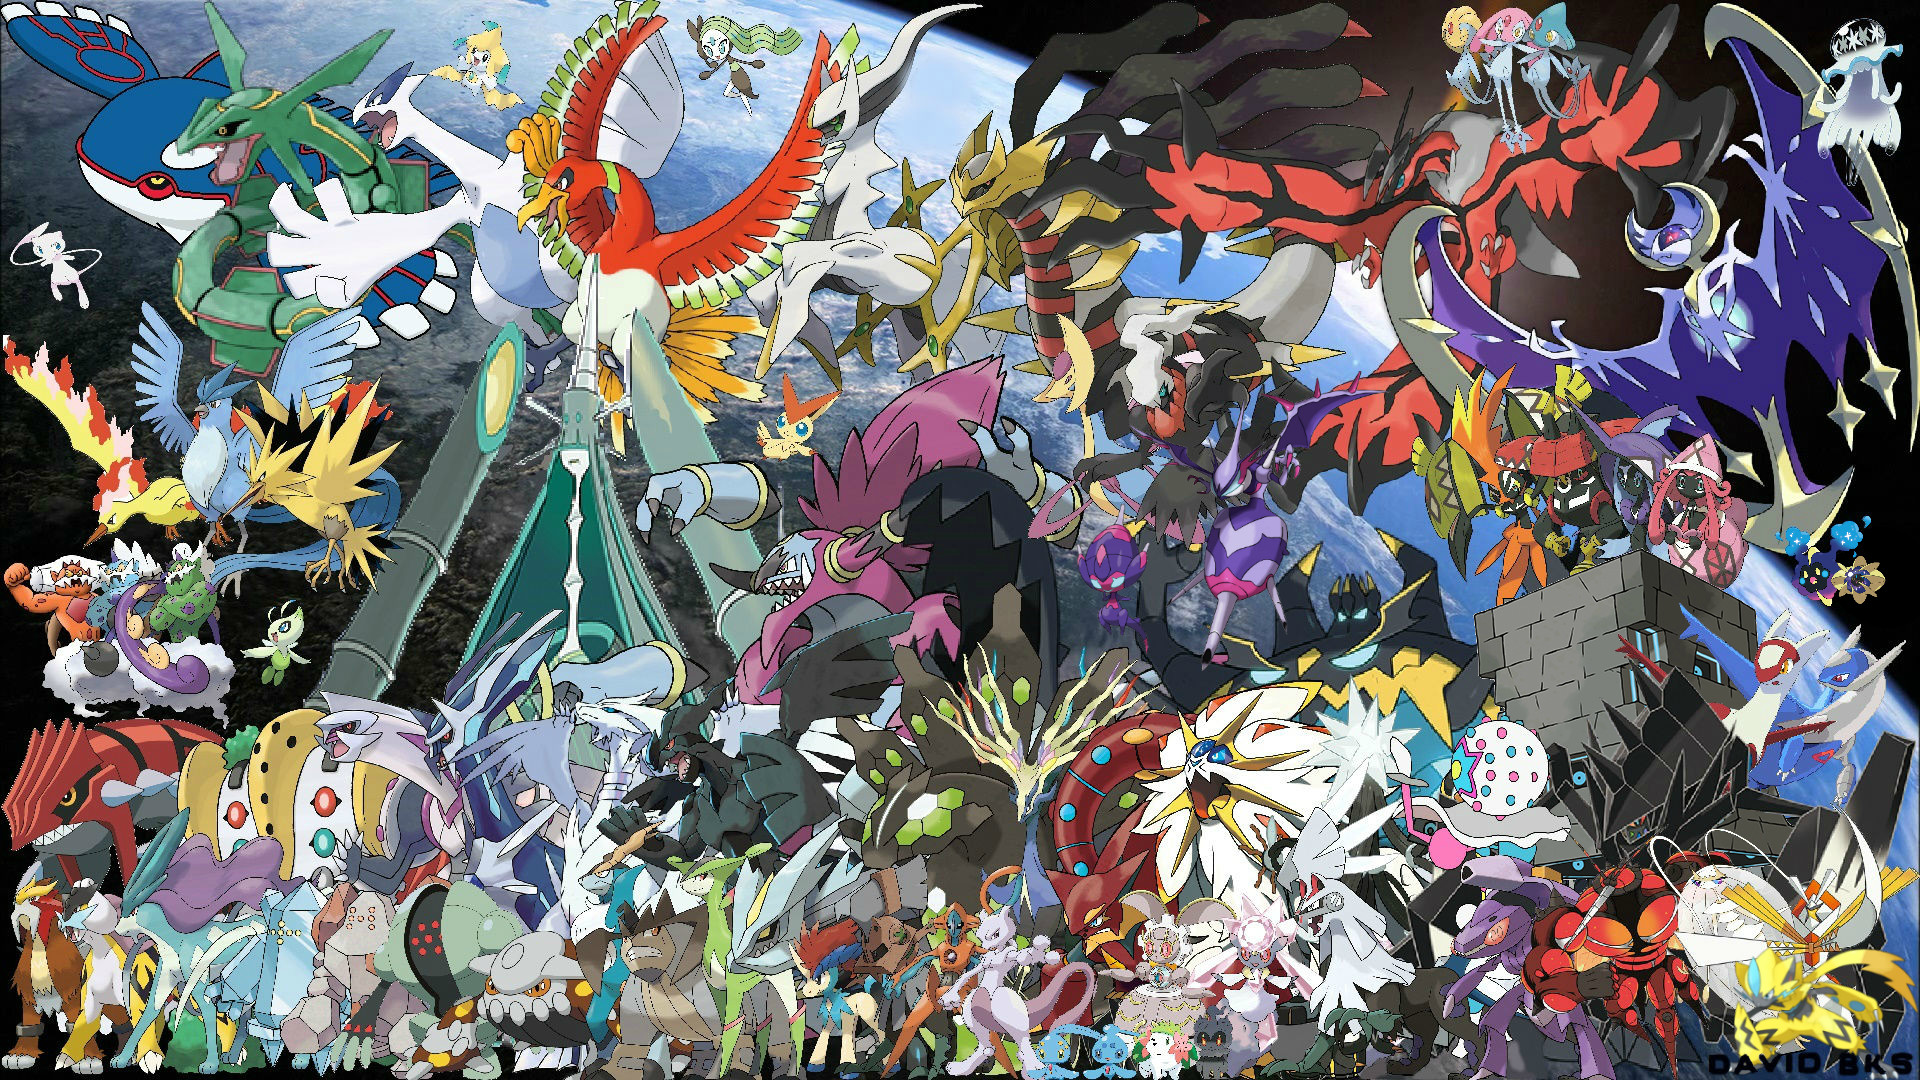 Legendary Cool Pokemon Pictures Wallpapers